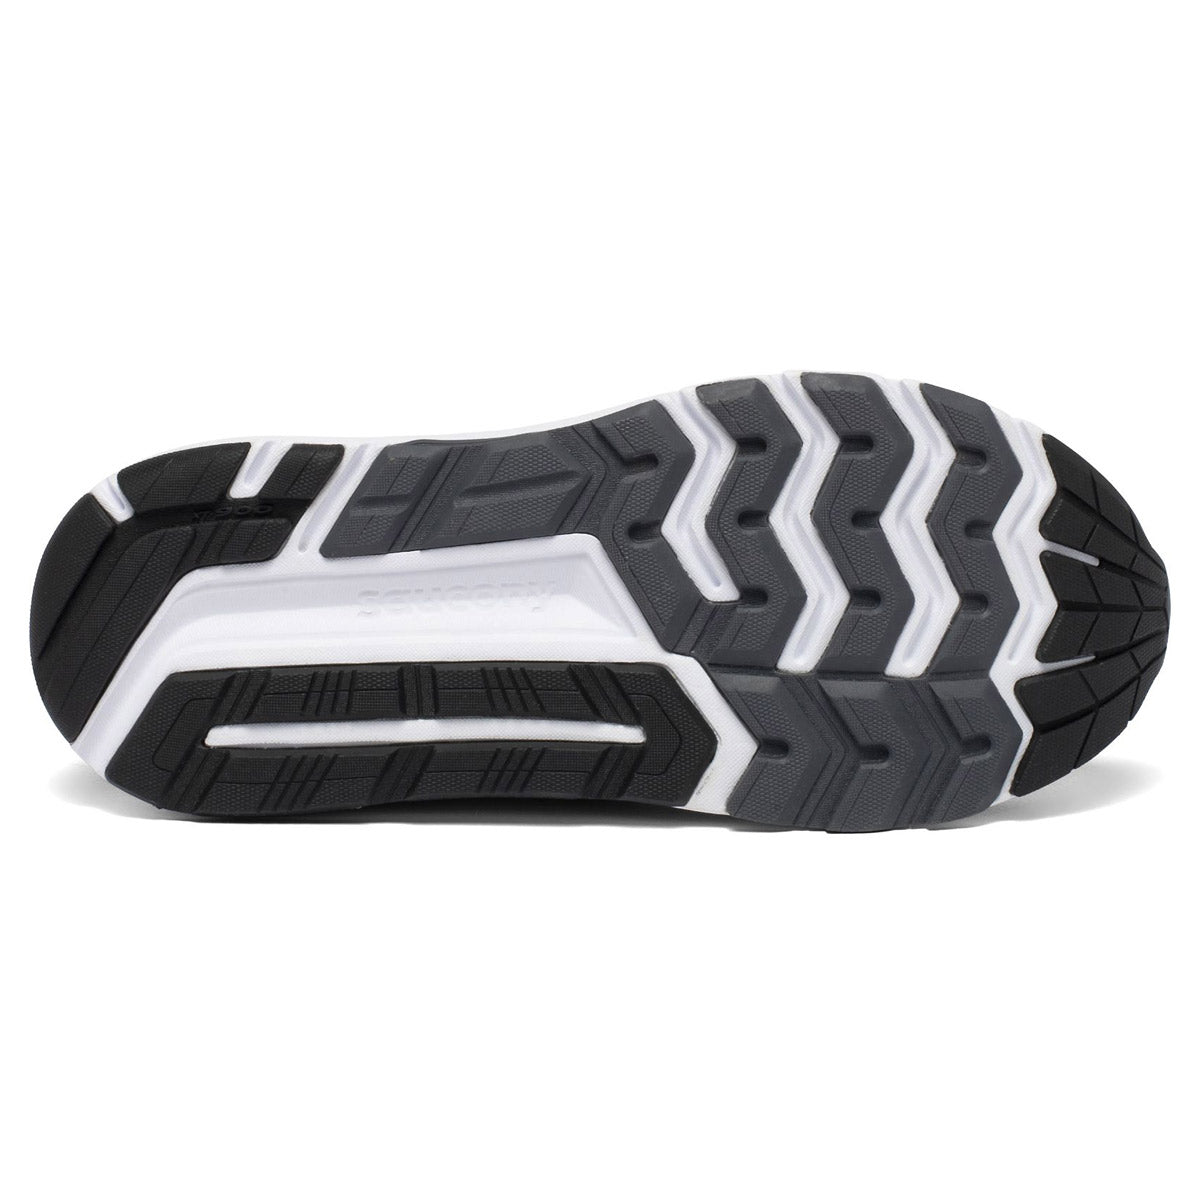 Sole of a Saucony Echelon 8 running shoe with a black and white tread pattern and visible PWRRUN midsole cushioning technology becomes Sole of a SAUCONY ECHELON 8 BLACK/WHITE - MENS running shoe with a black and white tread pattern and visible PWRRUN midsole cushioning technology.